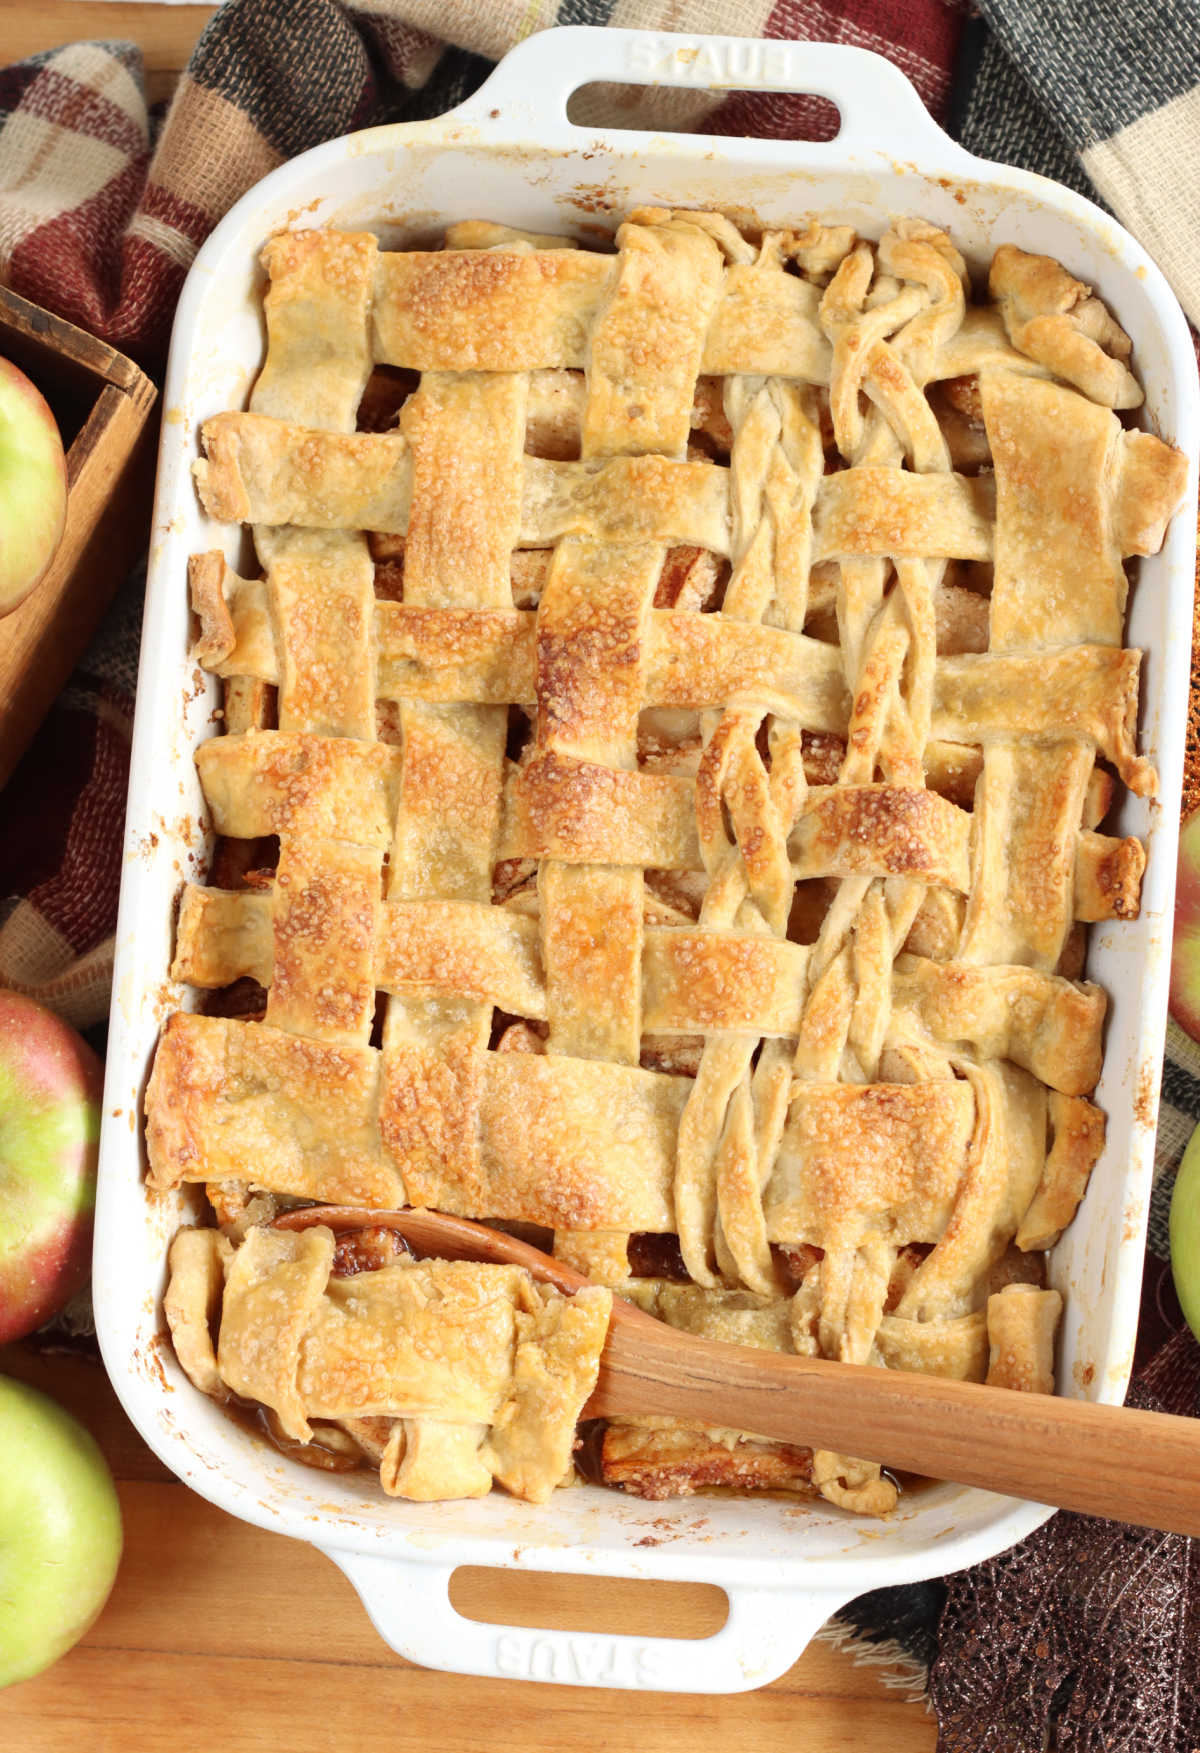 Cobbler with apples and pie crust in white baking dish on wood cutting board.